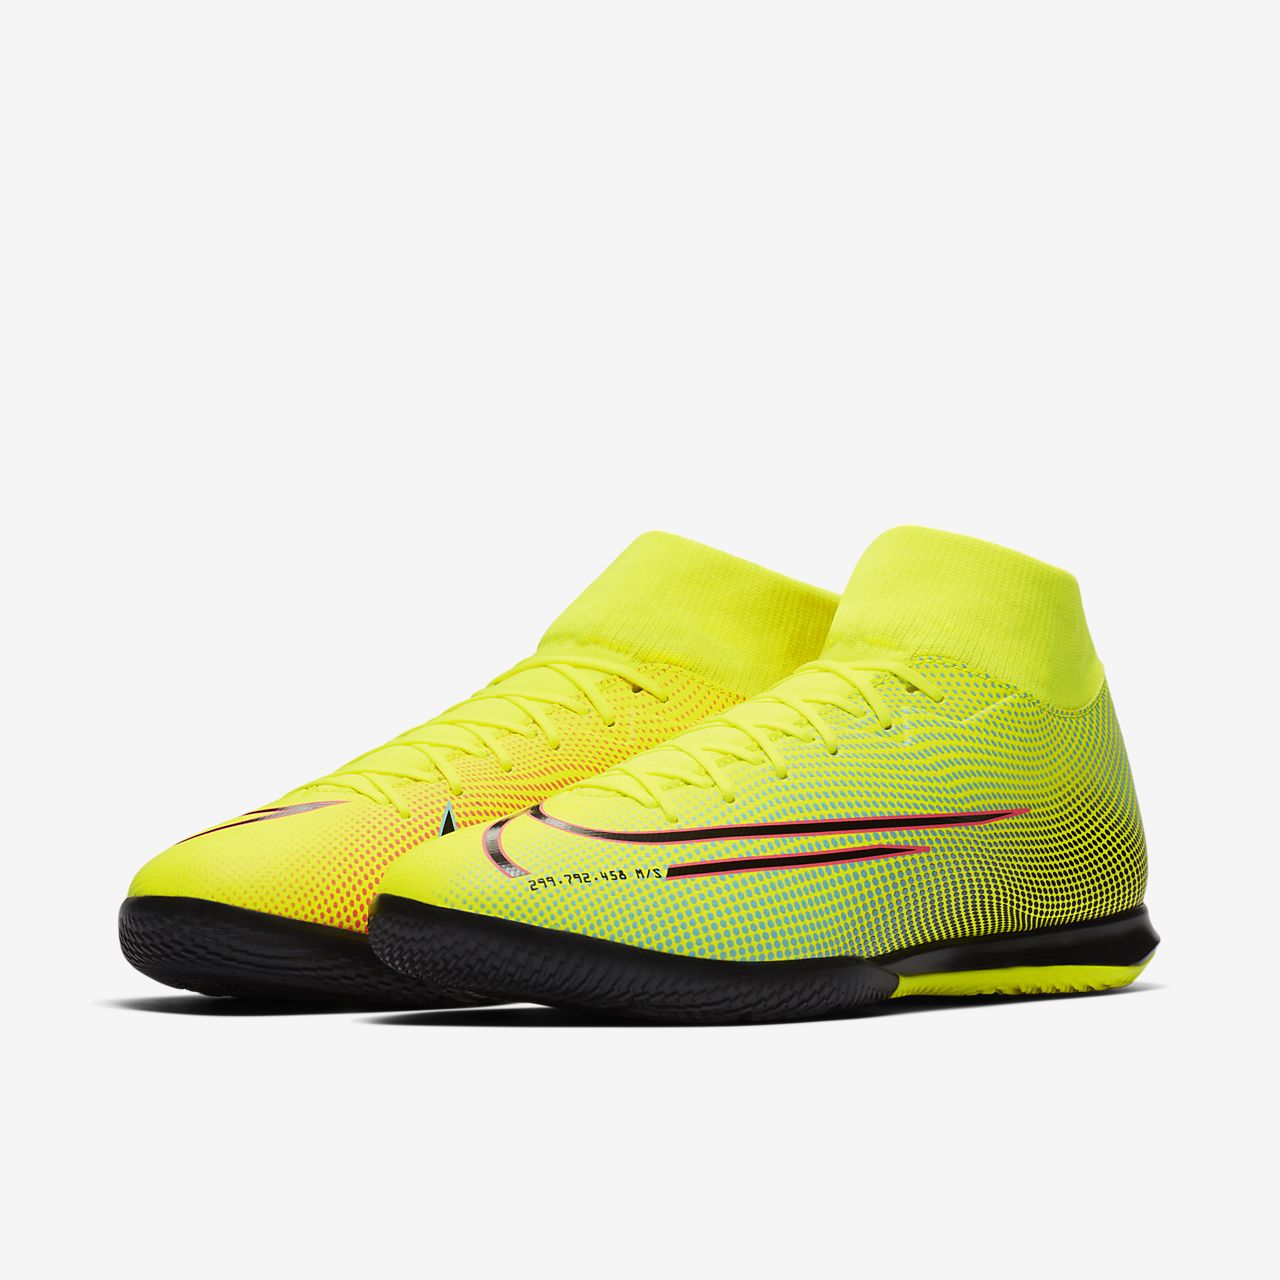 Nike Mercurial Superfly VII Academy MDS Turf Amazon.in